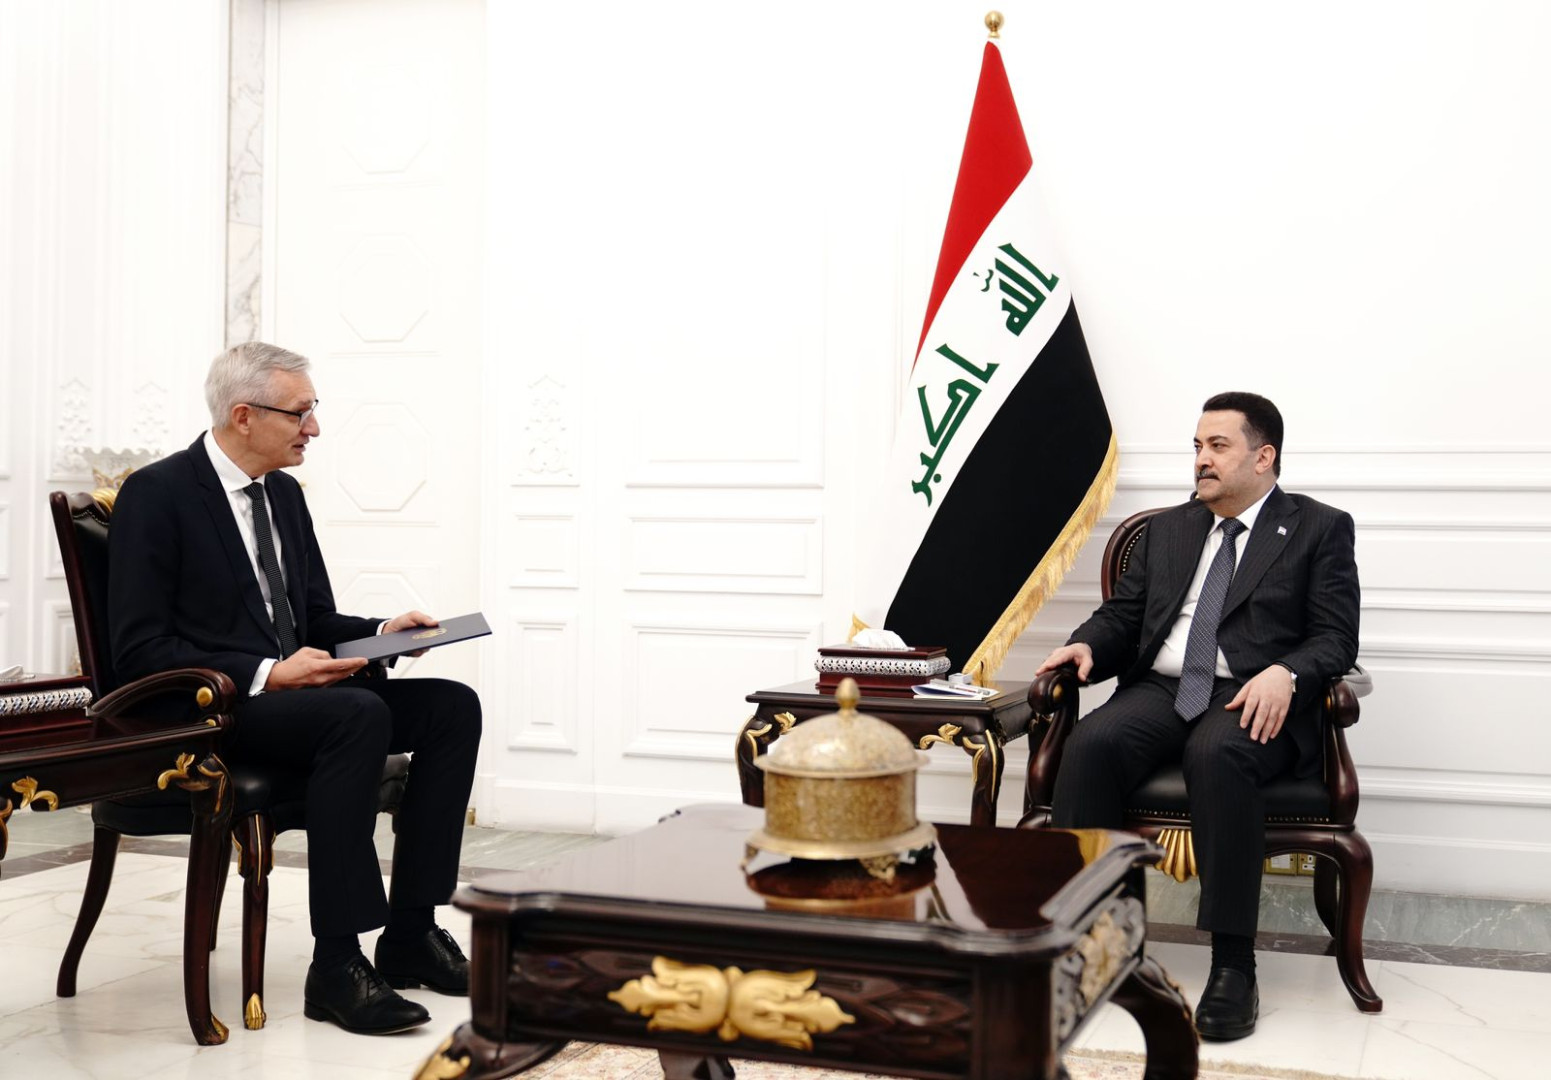 PM Al-Sudani received an invitation to visit Germany